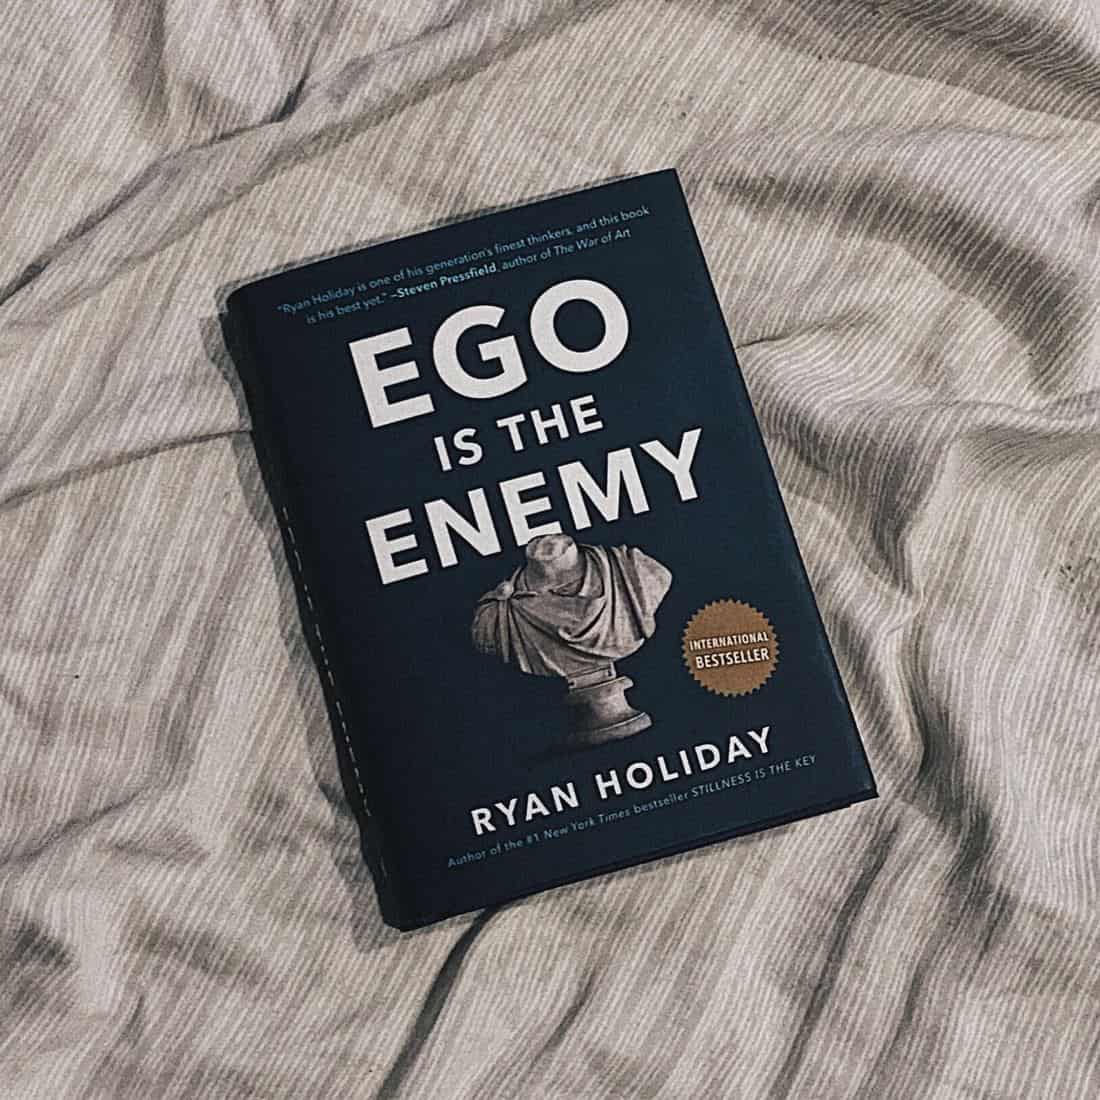 ego is the enemy, by ryan holiday